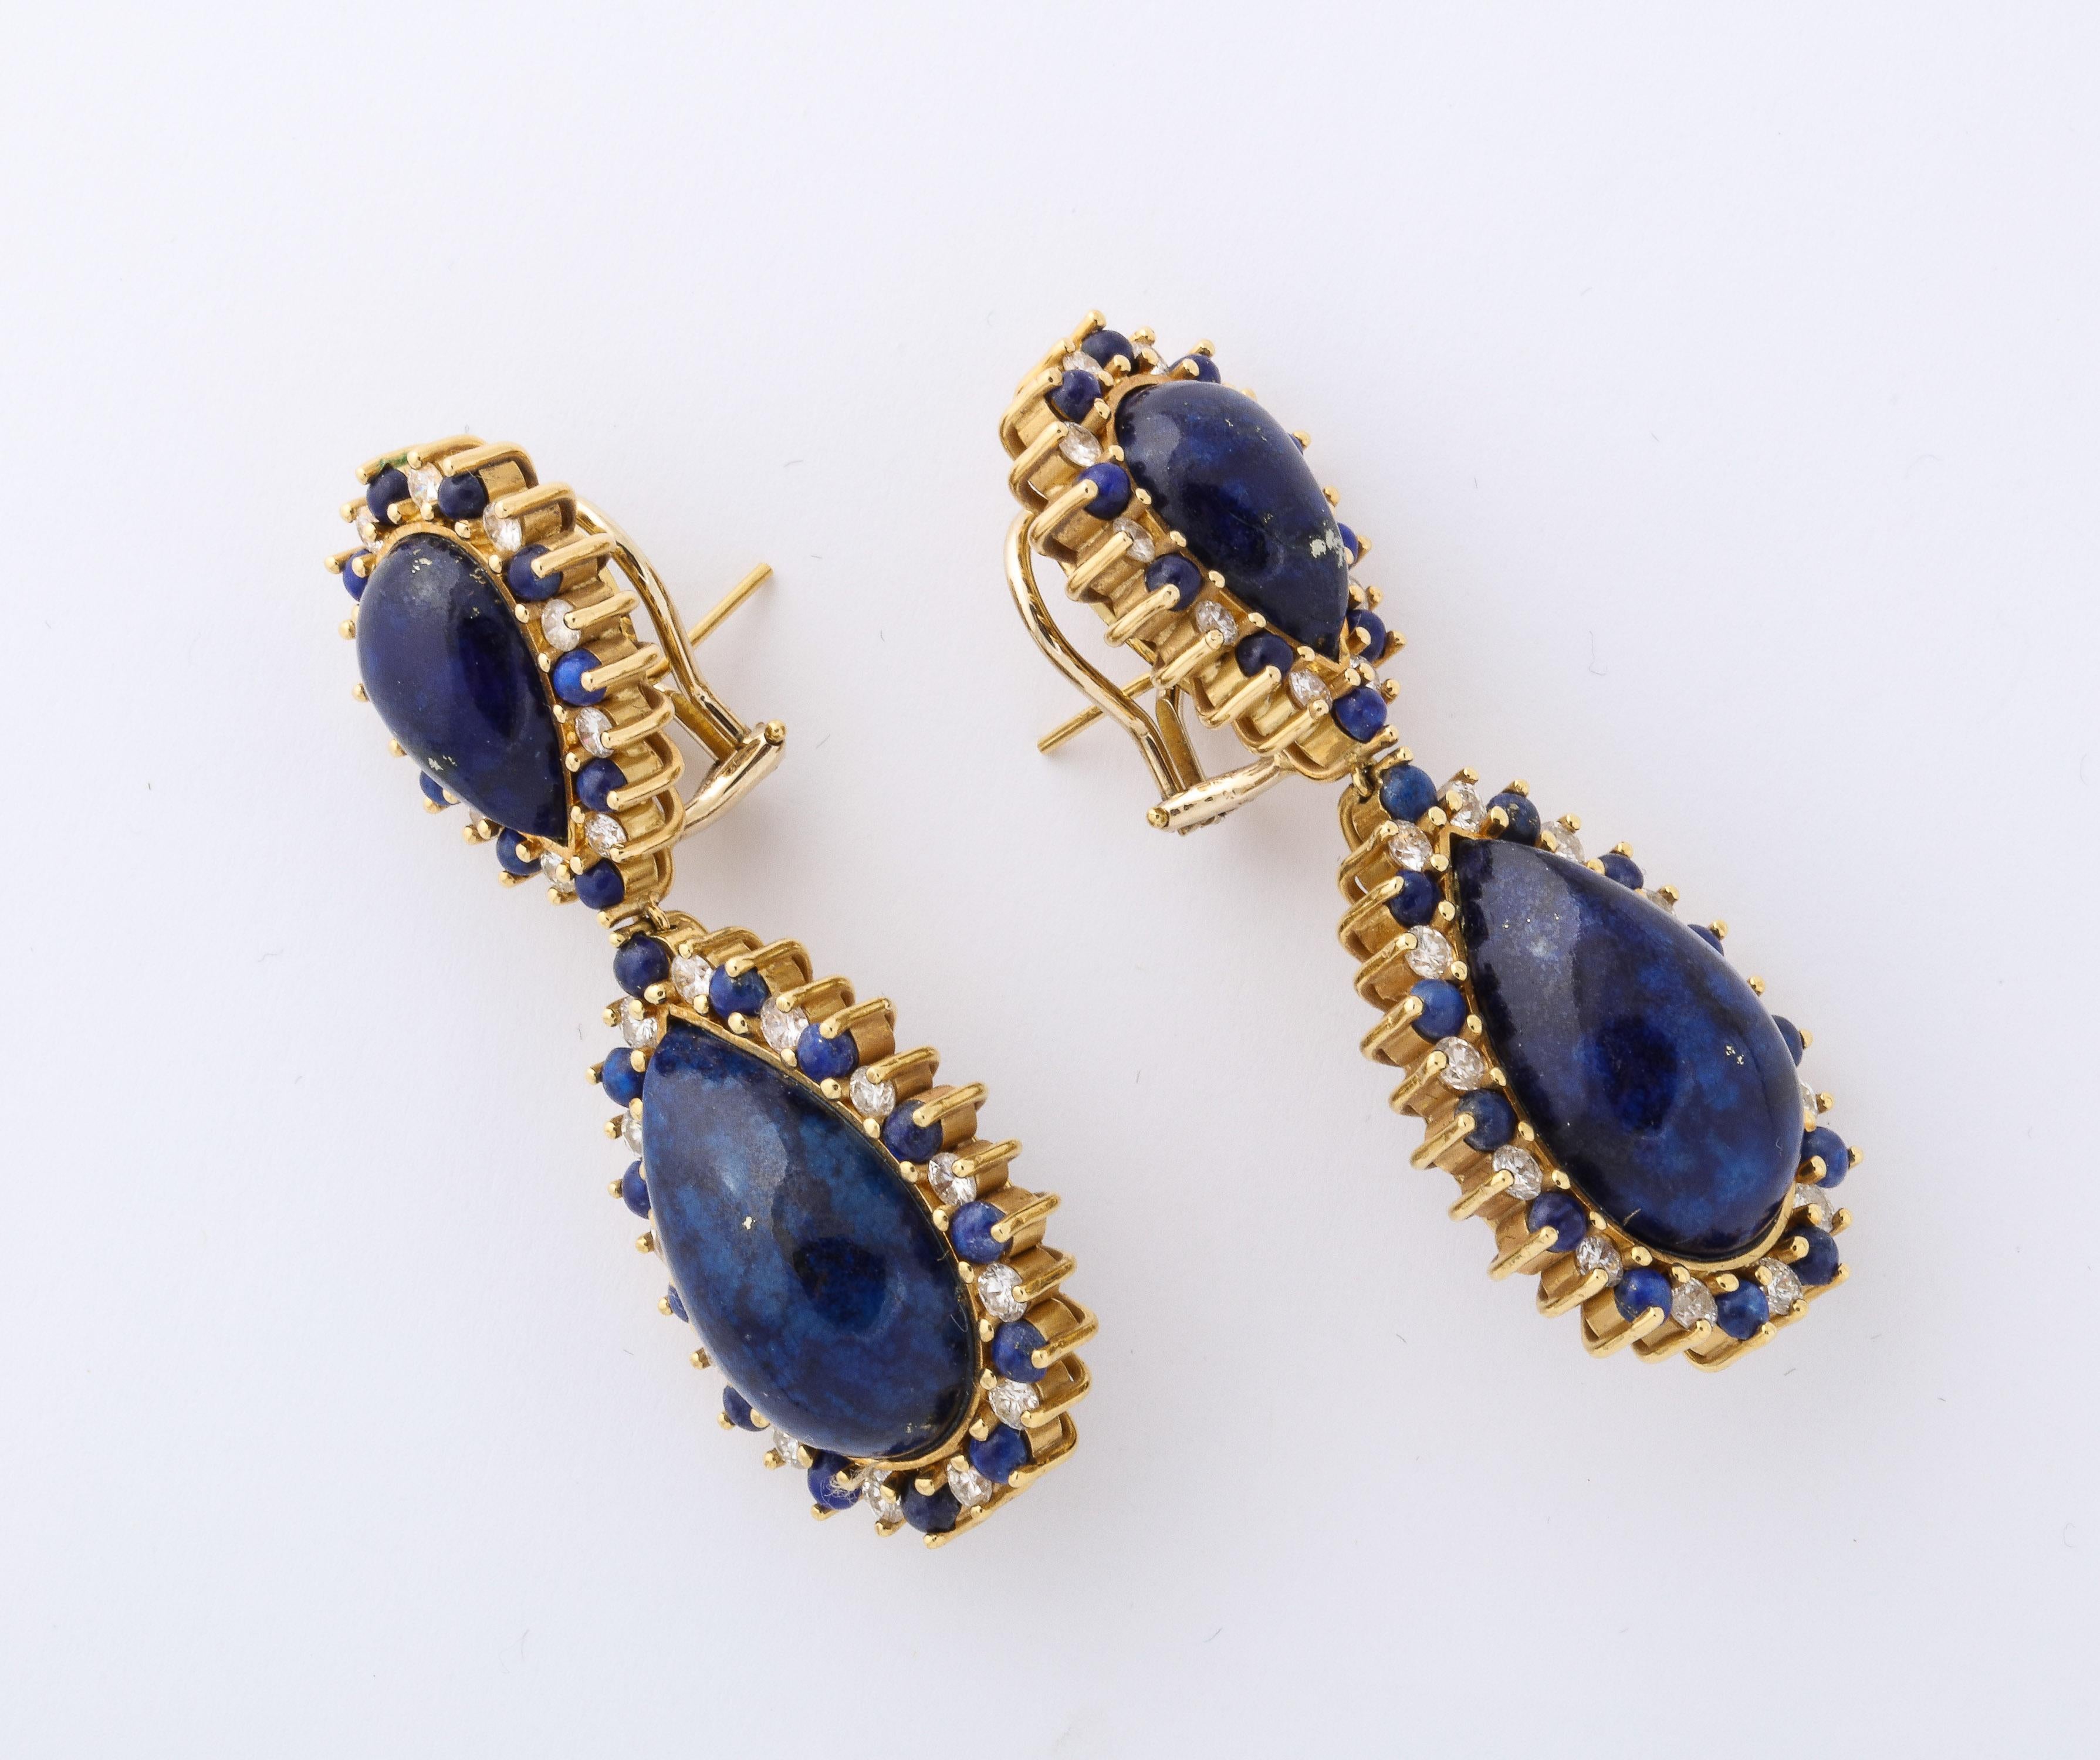 Sexy & voluptuous Lapis & full cut 7 clean white Diamond Drop Earrings.  Pear Shaped Lapis Lazuli  surrounded by alternating Lapis Bead & full cut Diamonds.  Approximate Diamond weight is 1carat.  Handmade -what a look!.  Adapted for pierced but